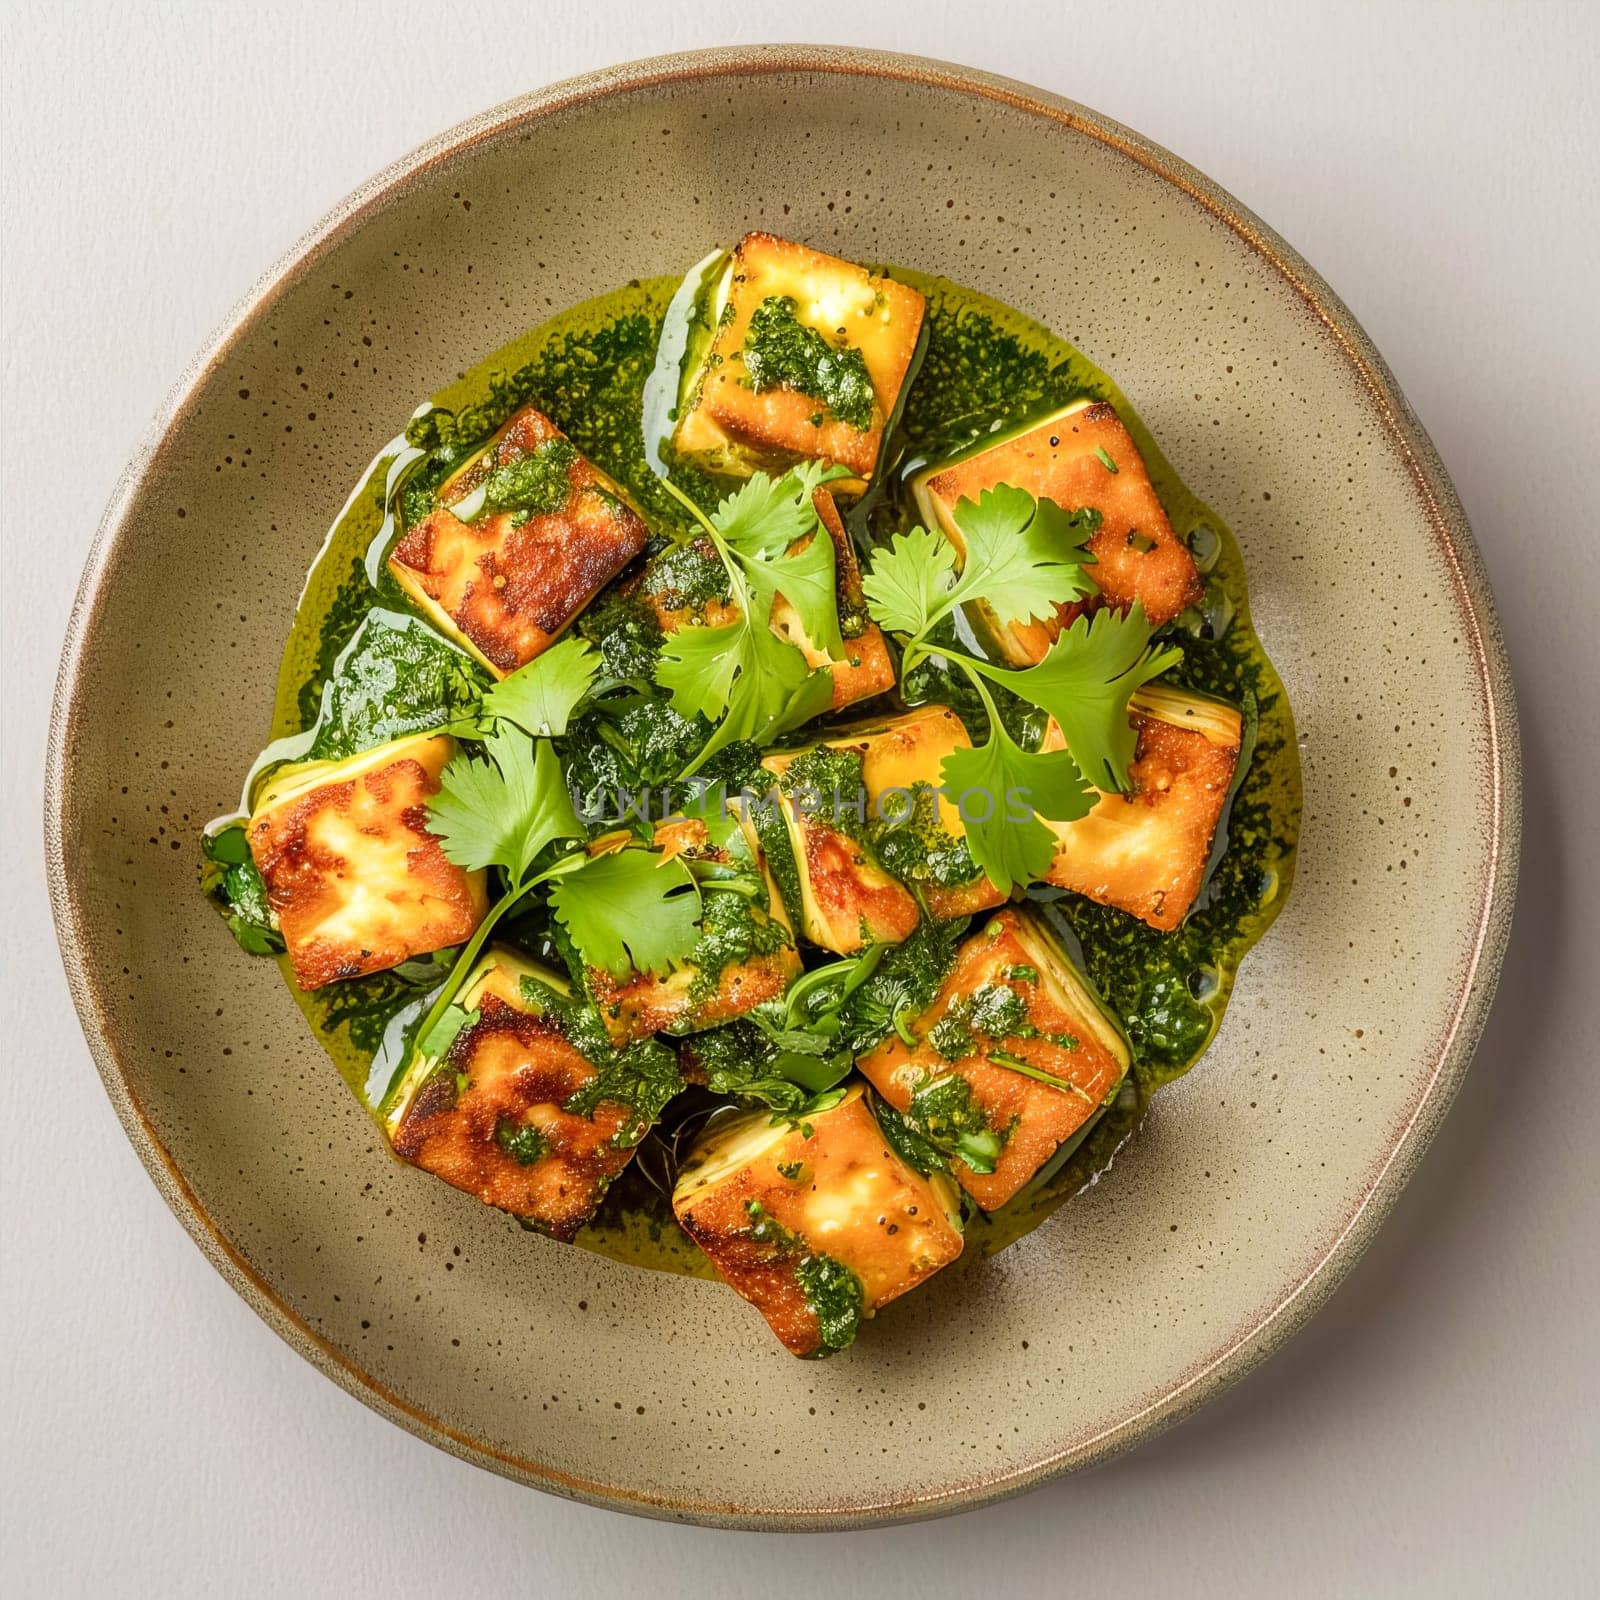 A dish of traditional Indian paneer cheese, diced and fried with spices, garnished with fresh cilantro and pesto on a ceramic plate. View from above.